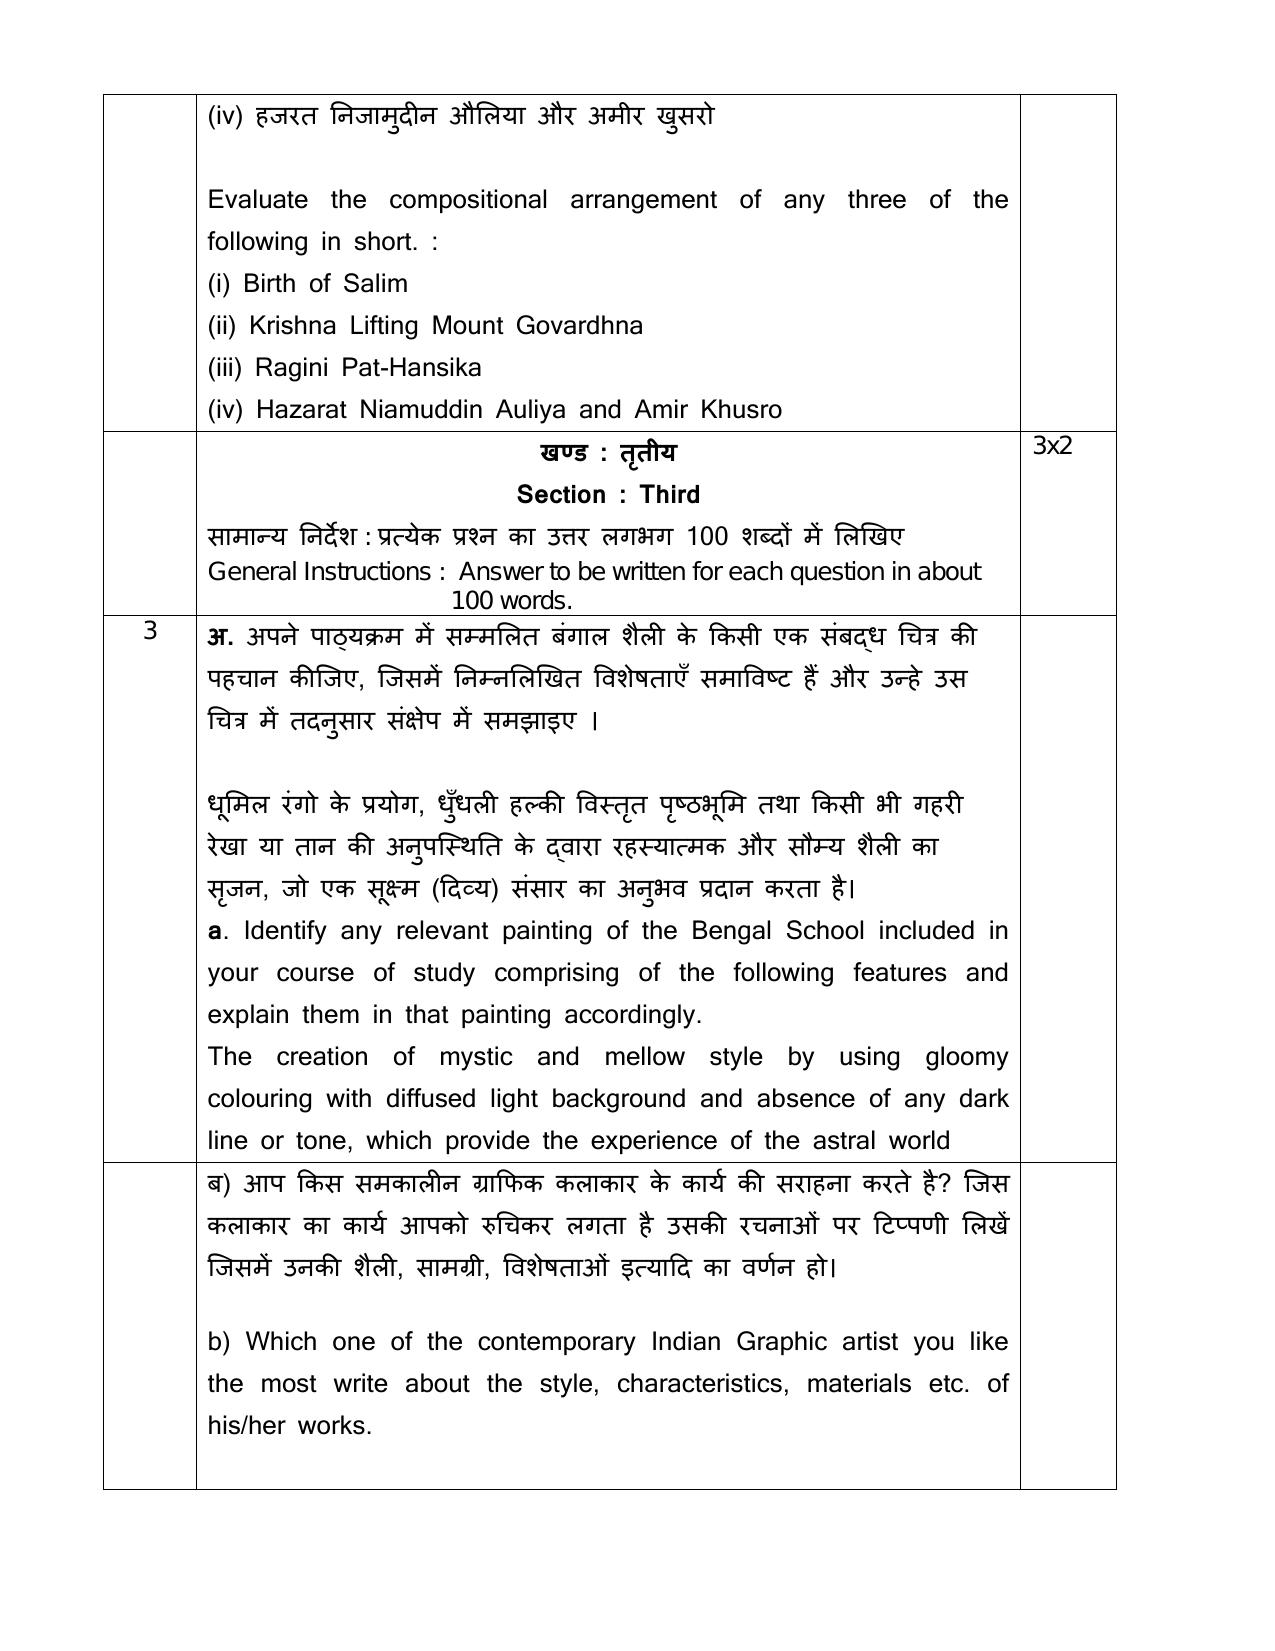 CBSE Class 12 Graphic -Sample Paper 2019-20 - Page 4